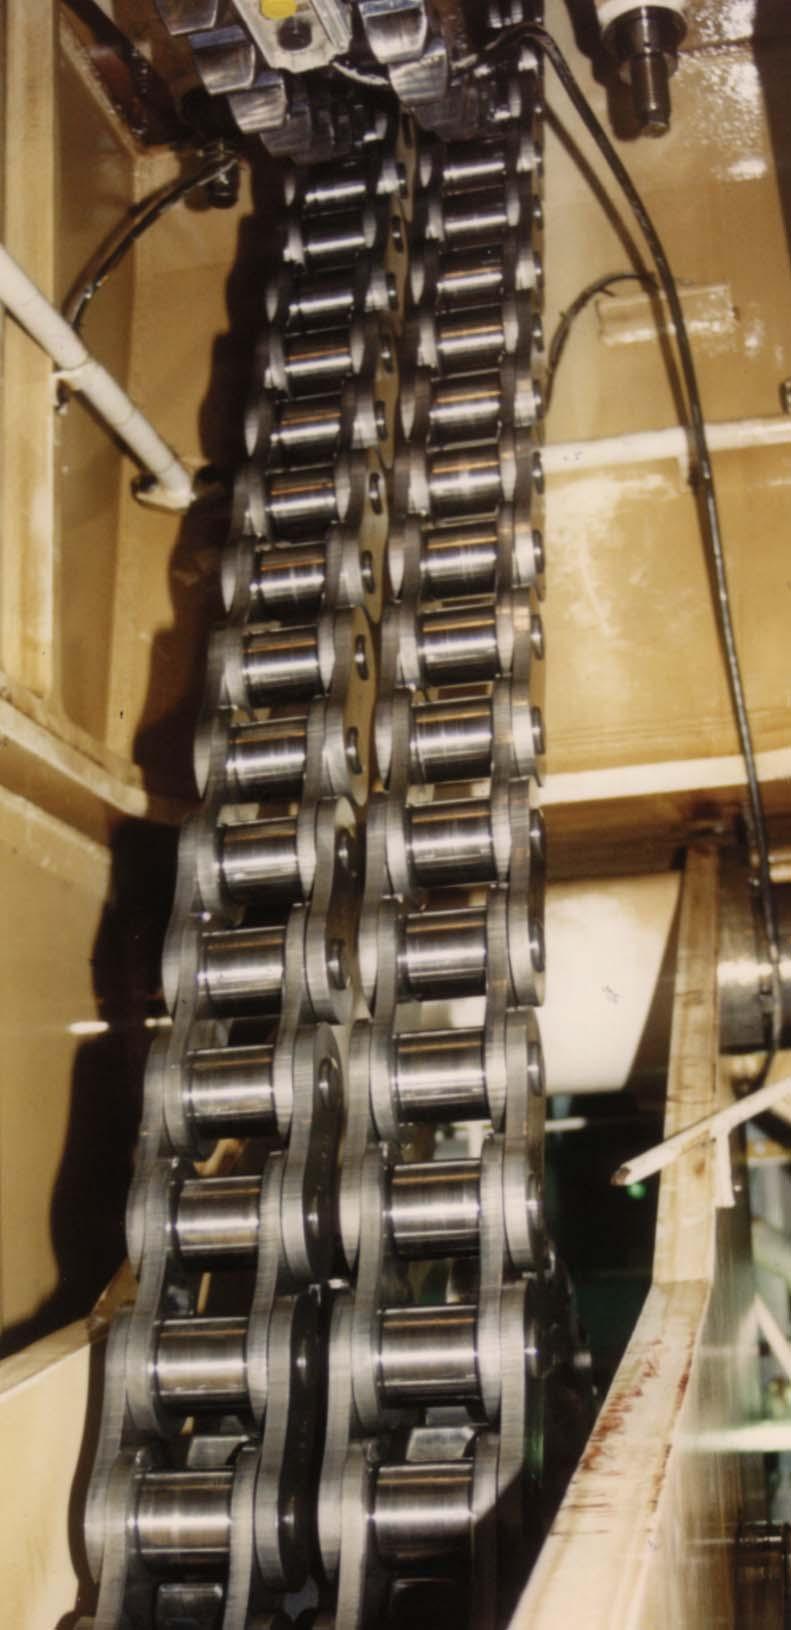 124 I Renold Roller Chain Catalogue Marine Diesel Chain In one of the toughest and potentially most remote applications there is, chain is required to keep a ship's engine operational with a high